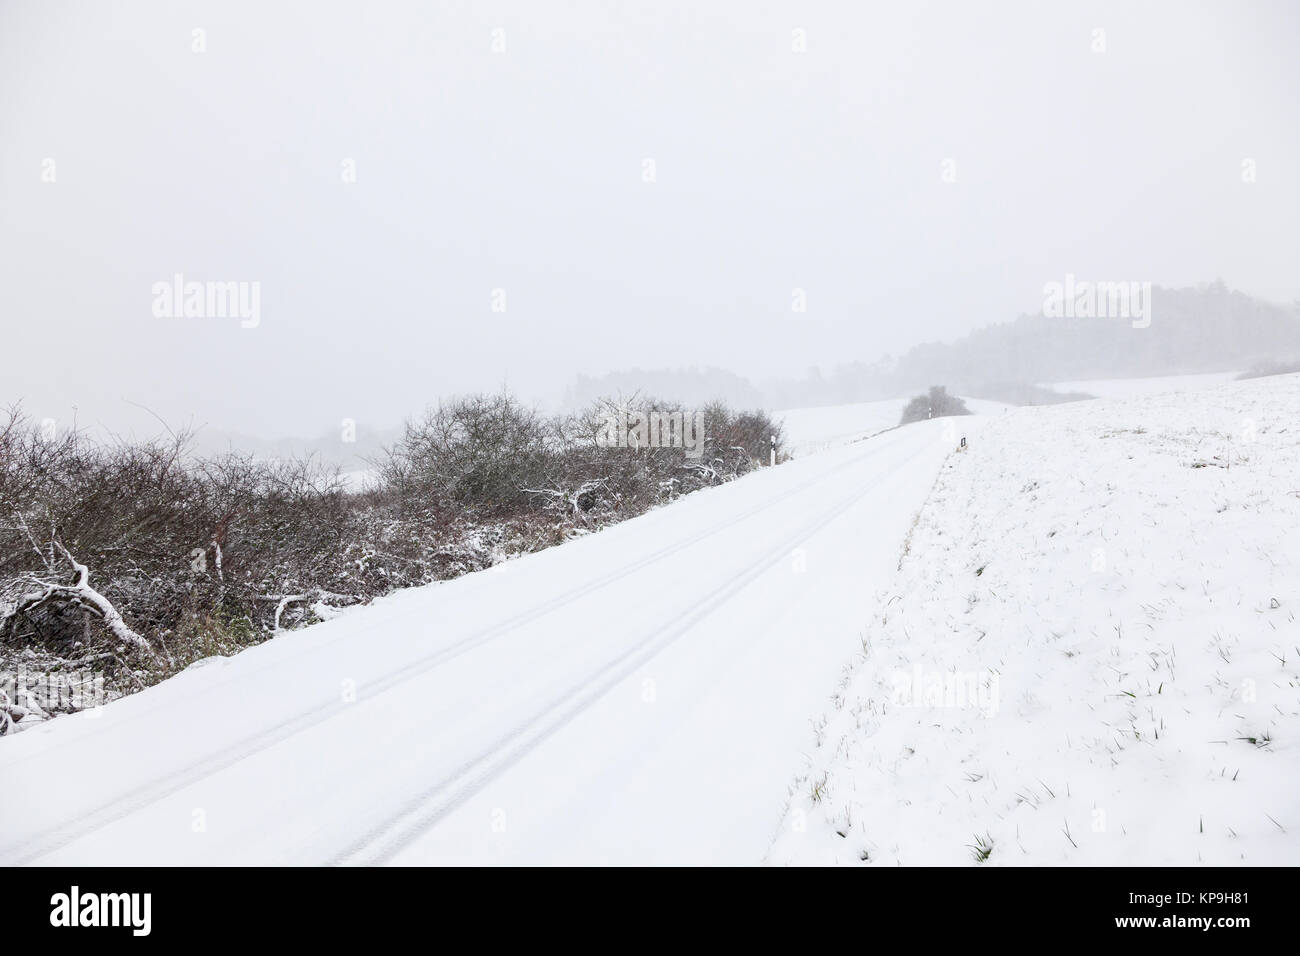 Snow covered road in a snowy white winter landscape Stock Photo